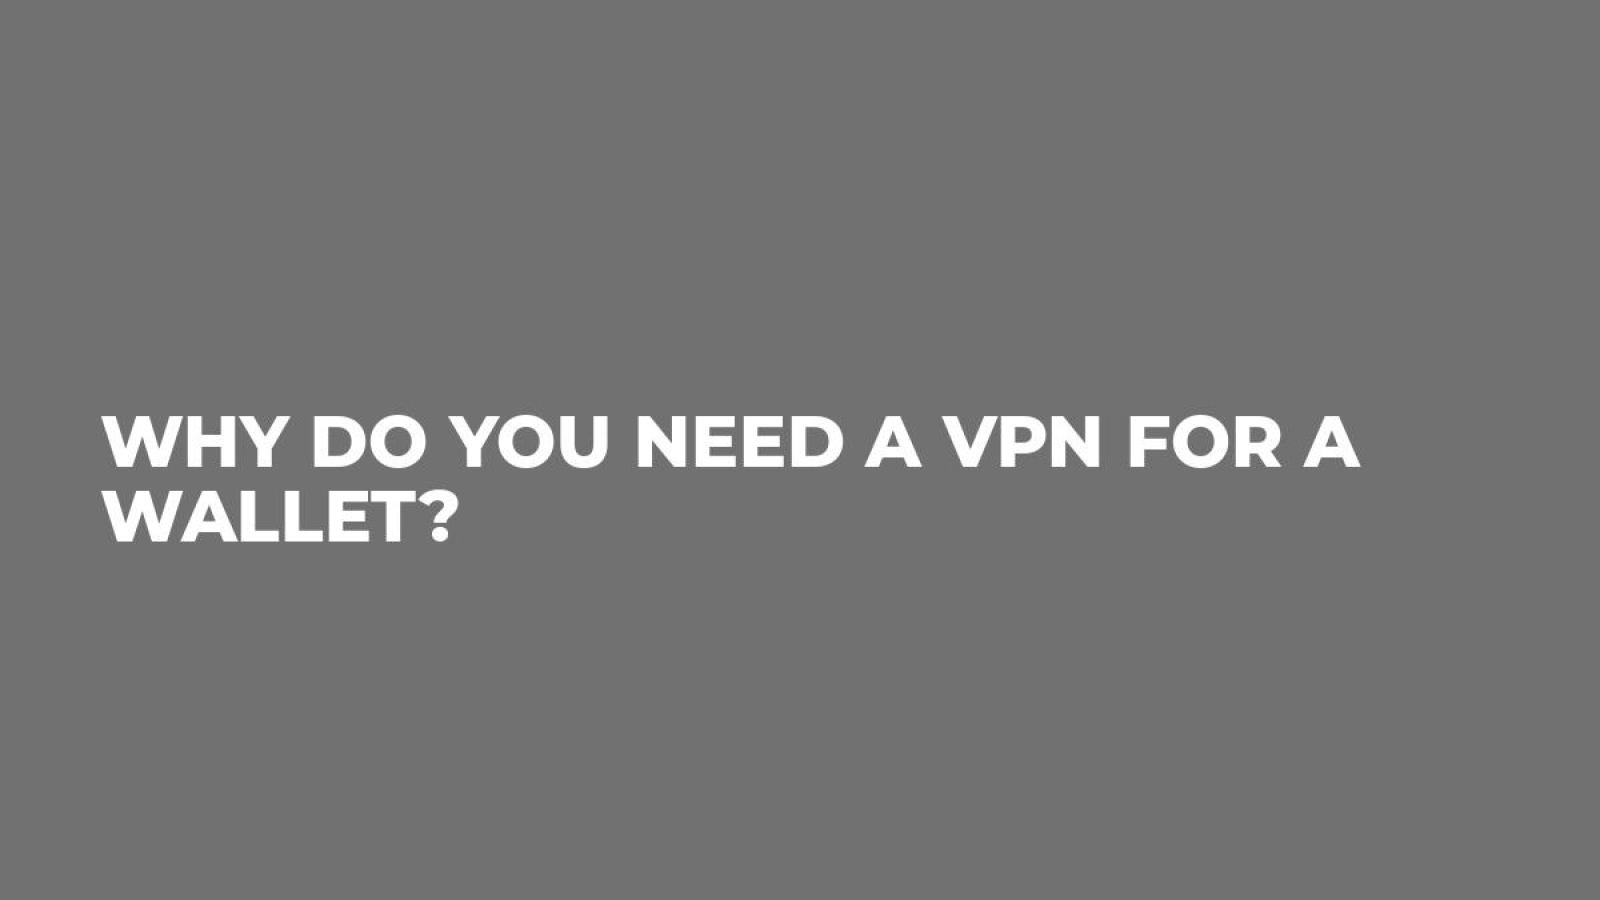 Why Do You Need a VPN For a Wallet?